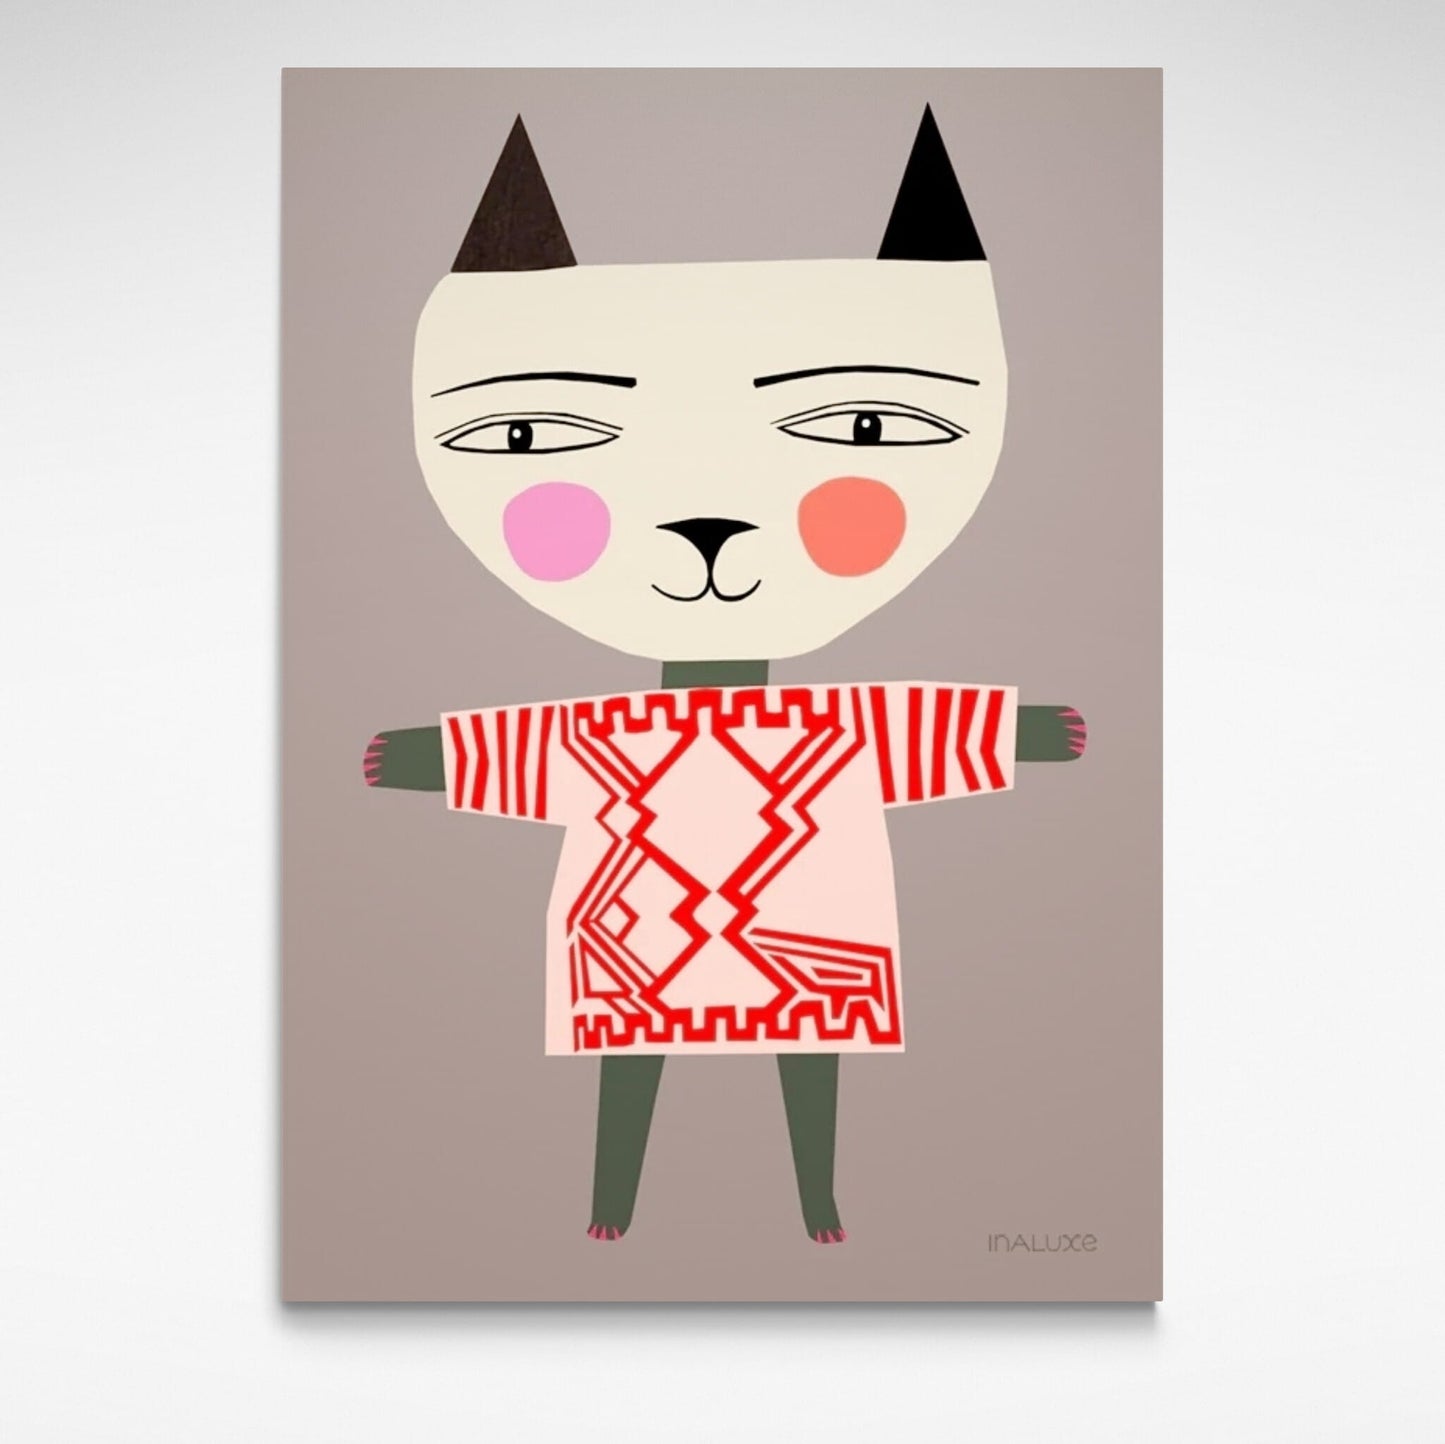 Print of a cat with outstretched arms and pink dress